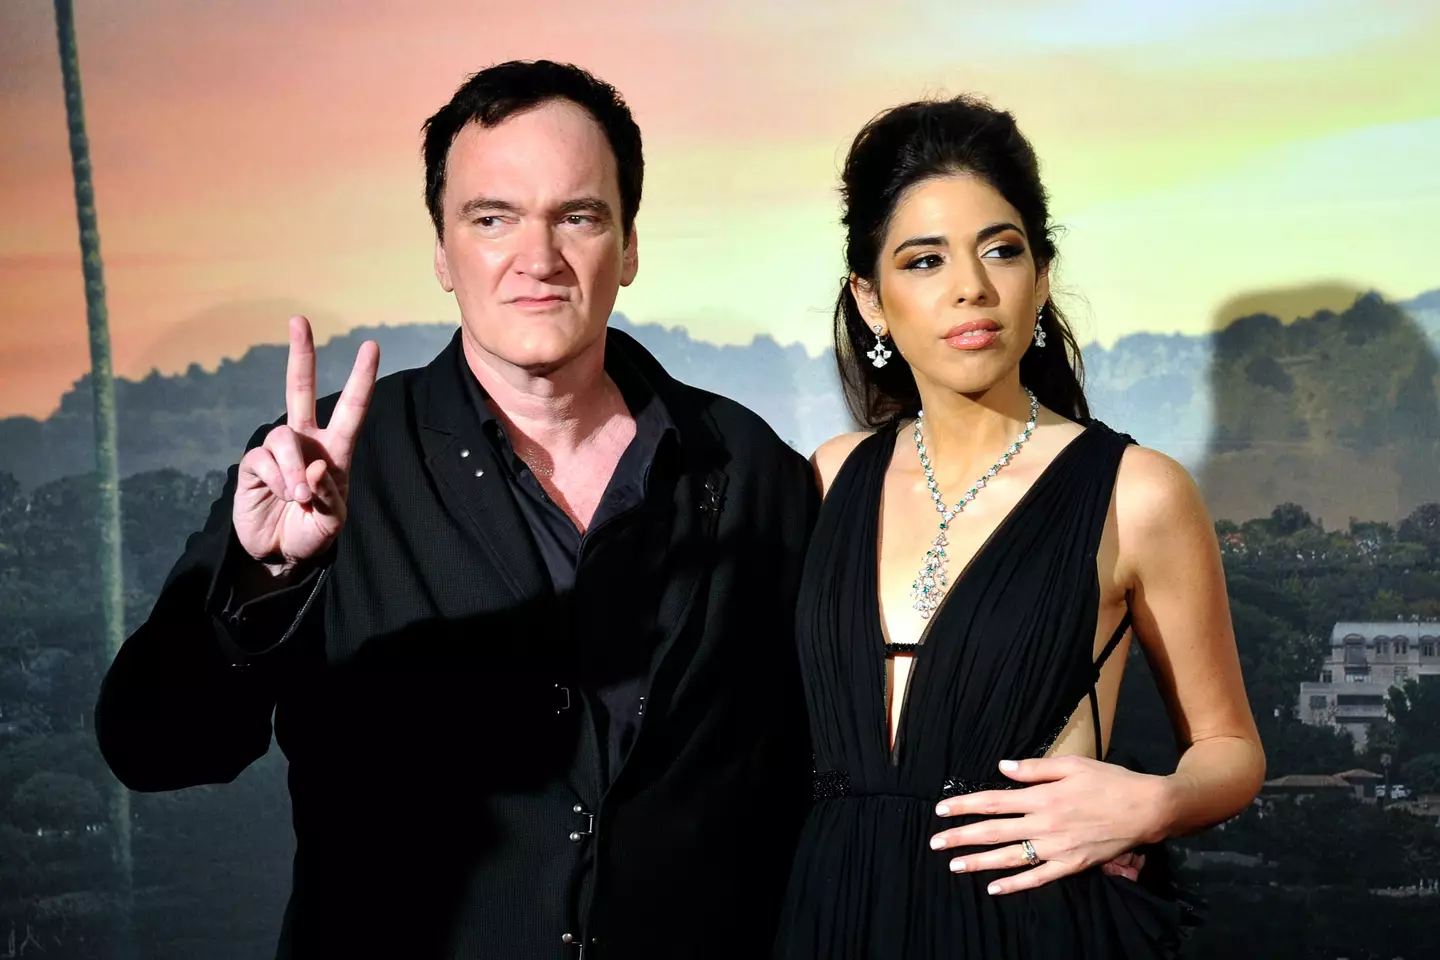 Quentin Tarantino and wife Daniella Pick welcomed their first son, Leo, in 2020 (PA Images)